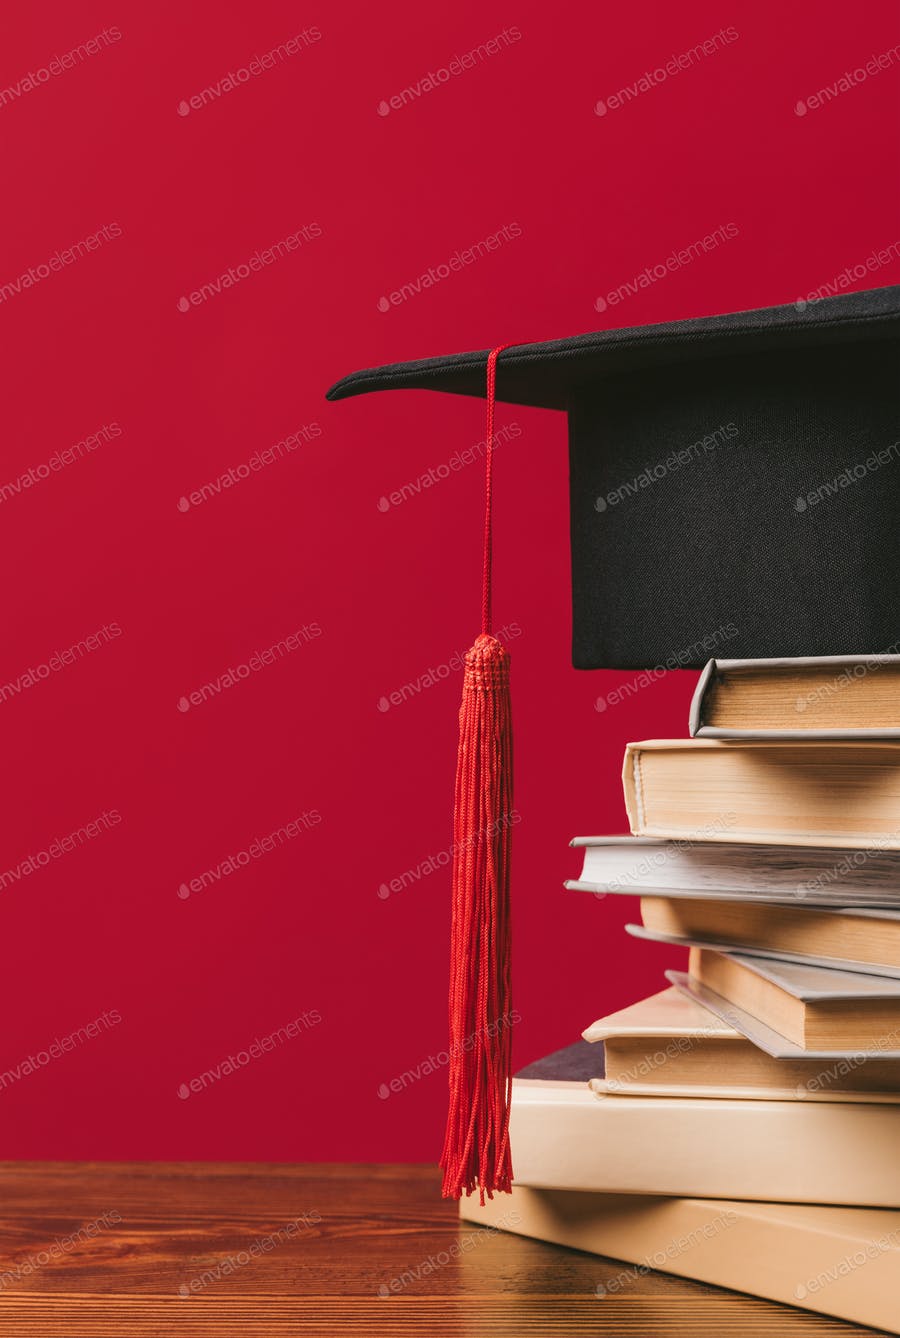 Cropped Image Of Academic Cap On Pile Of Books On Red